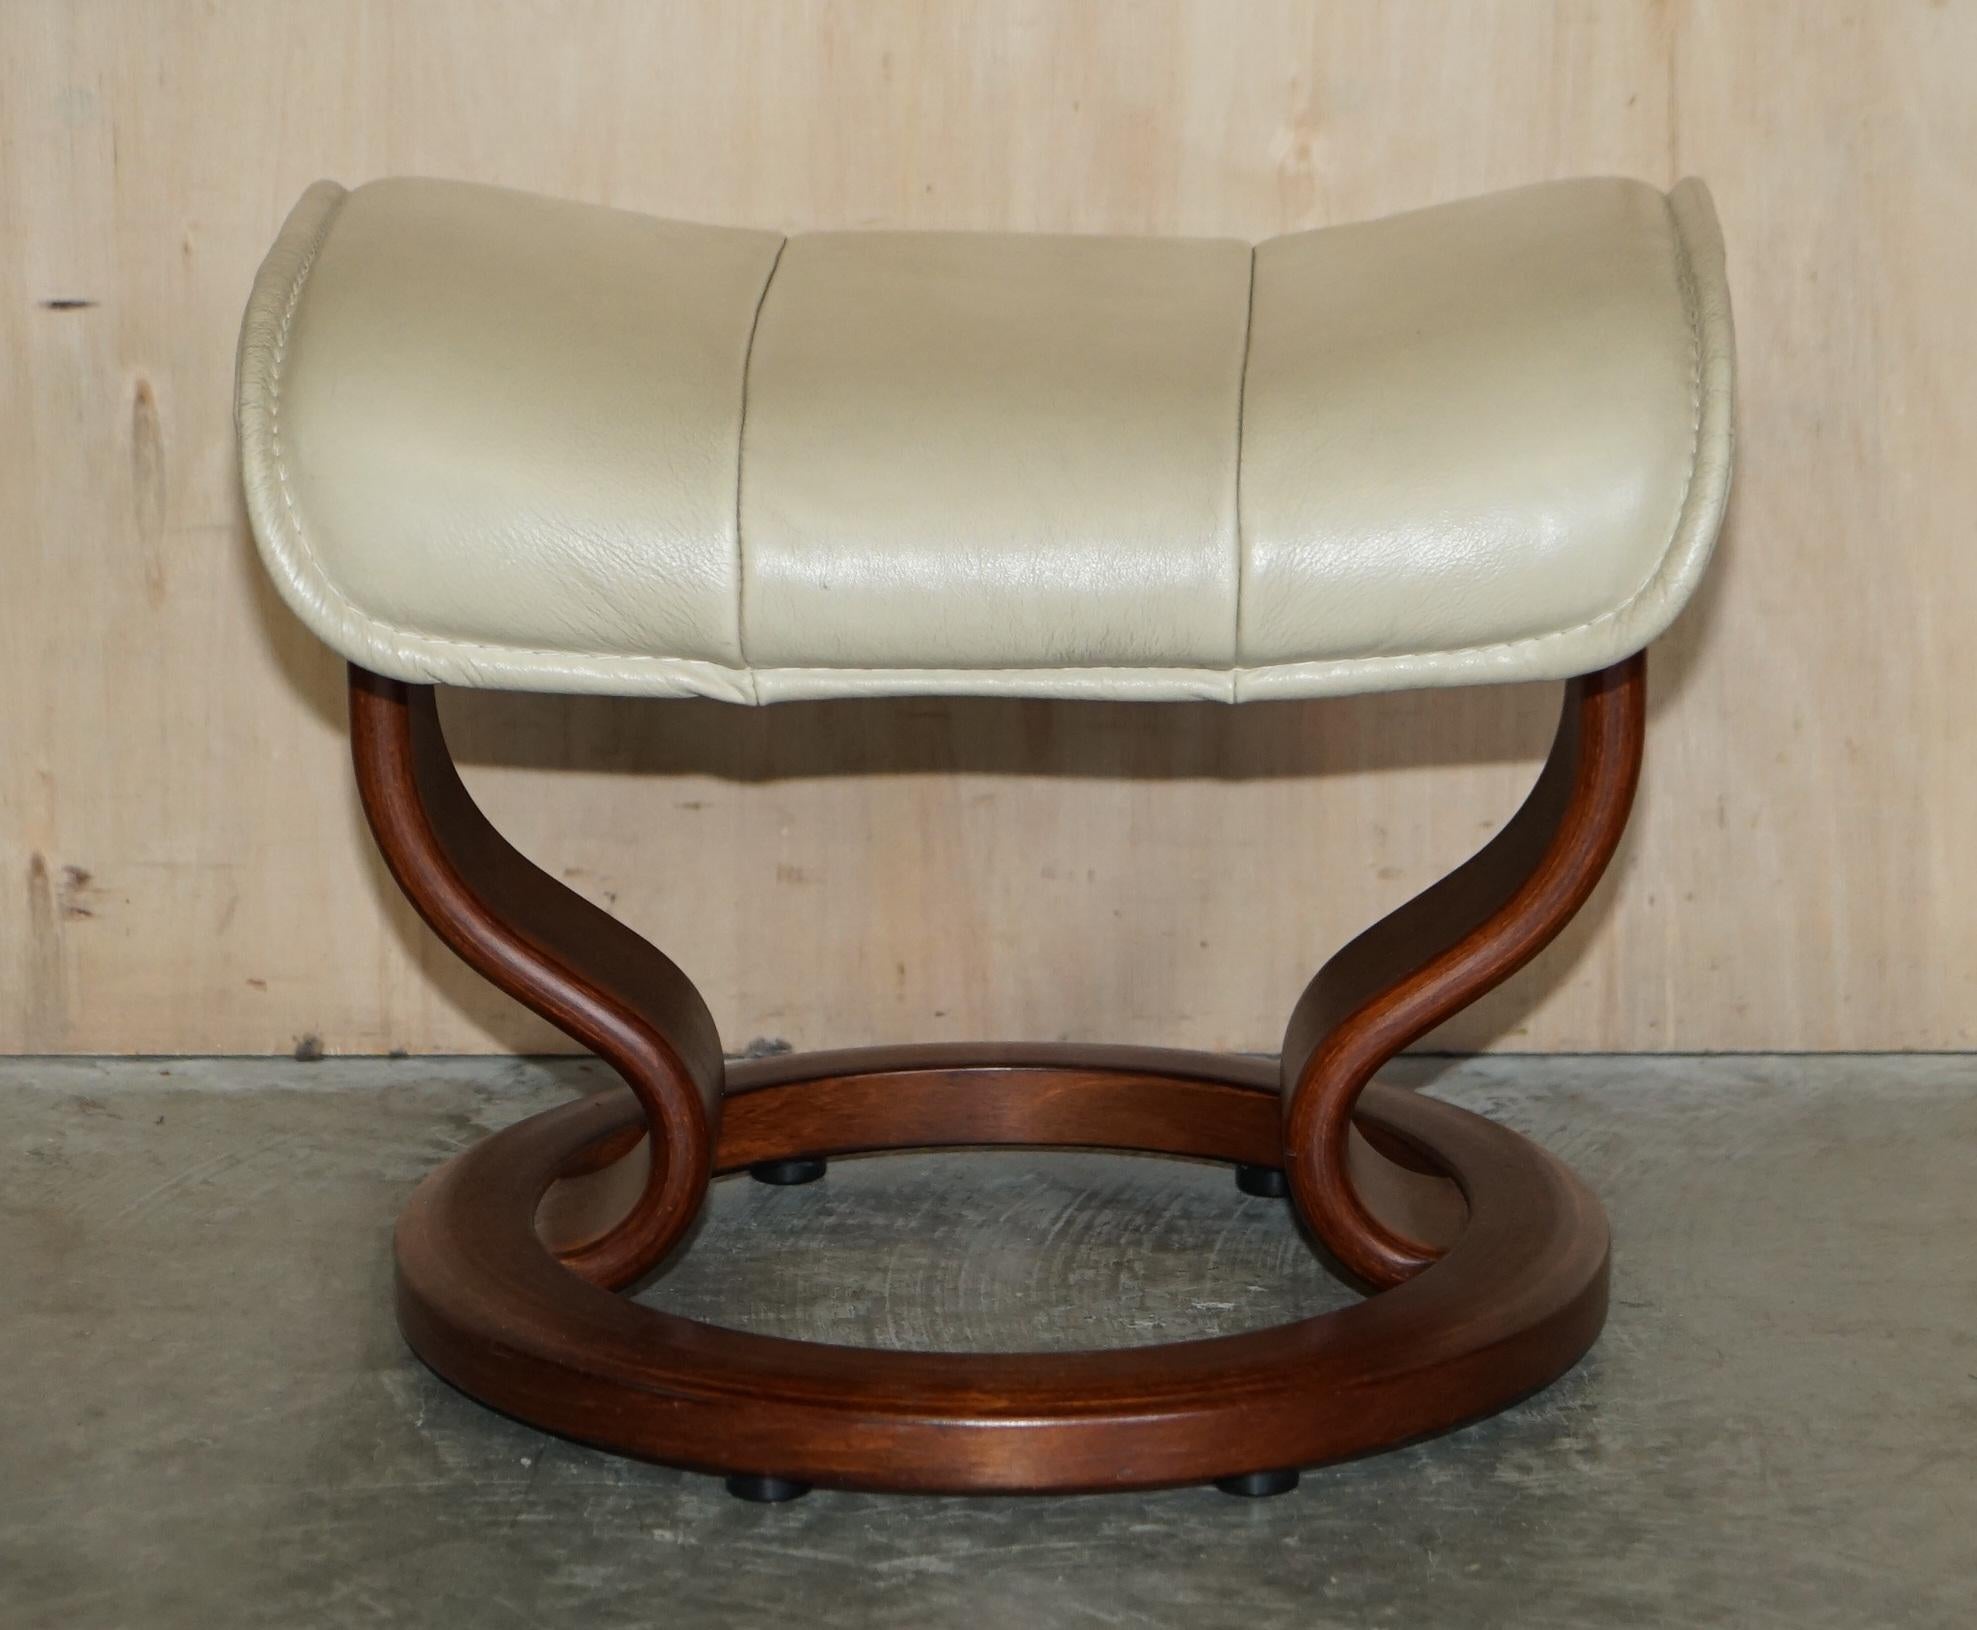 We are delighted to offer for sale this very nice Ekornes stressless recliner footstool in cream leather.

A good looking well made and decorative footstool, made by one of the most famous companies in the world for suppling luxury seating.

We